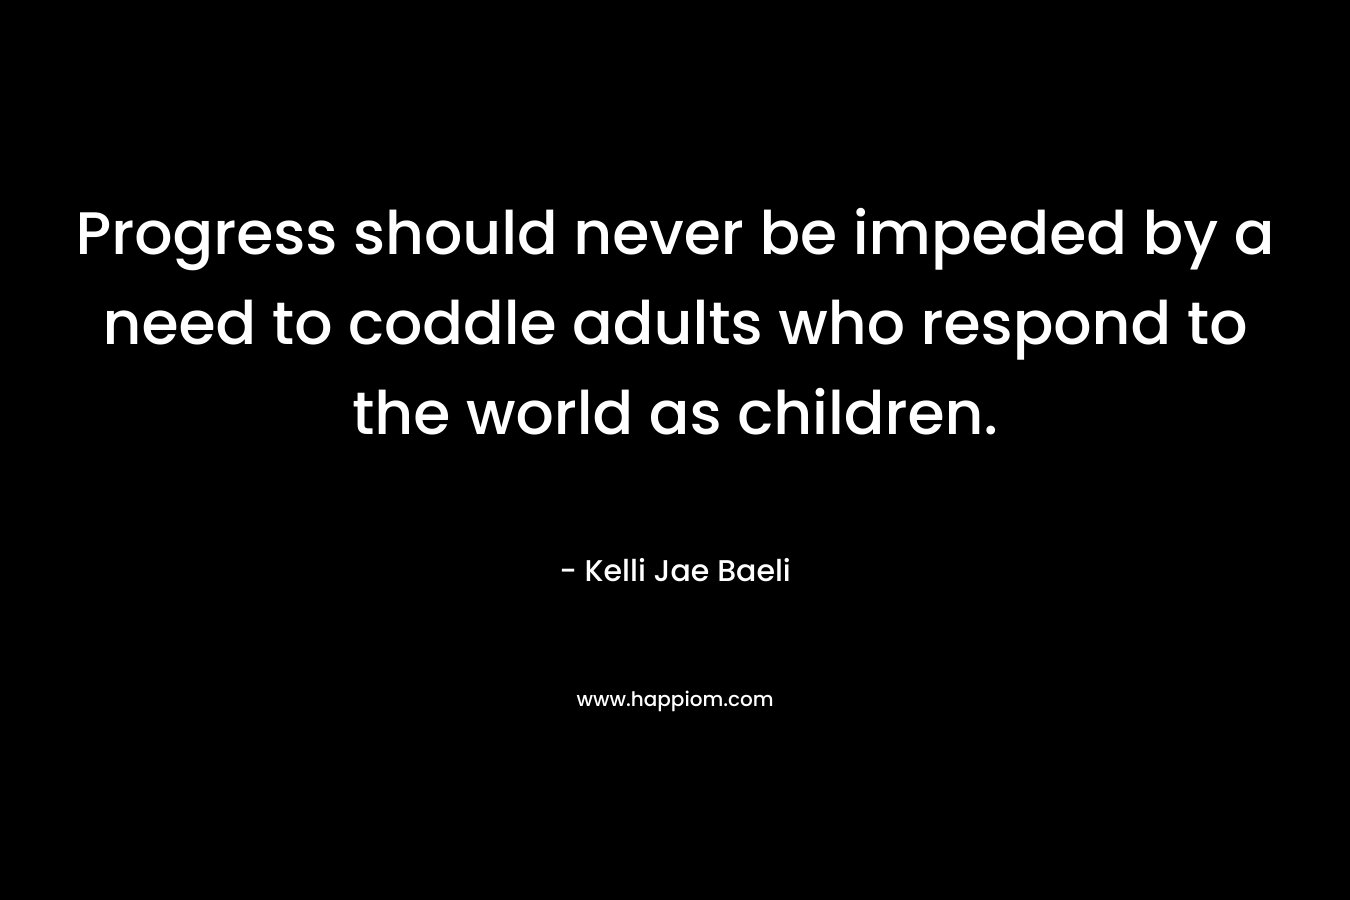 Progress should never be impeded by a need to coddle adults who respond to the world as children.